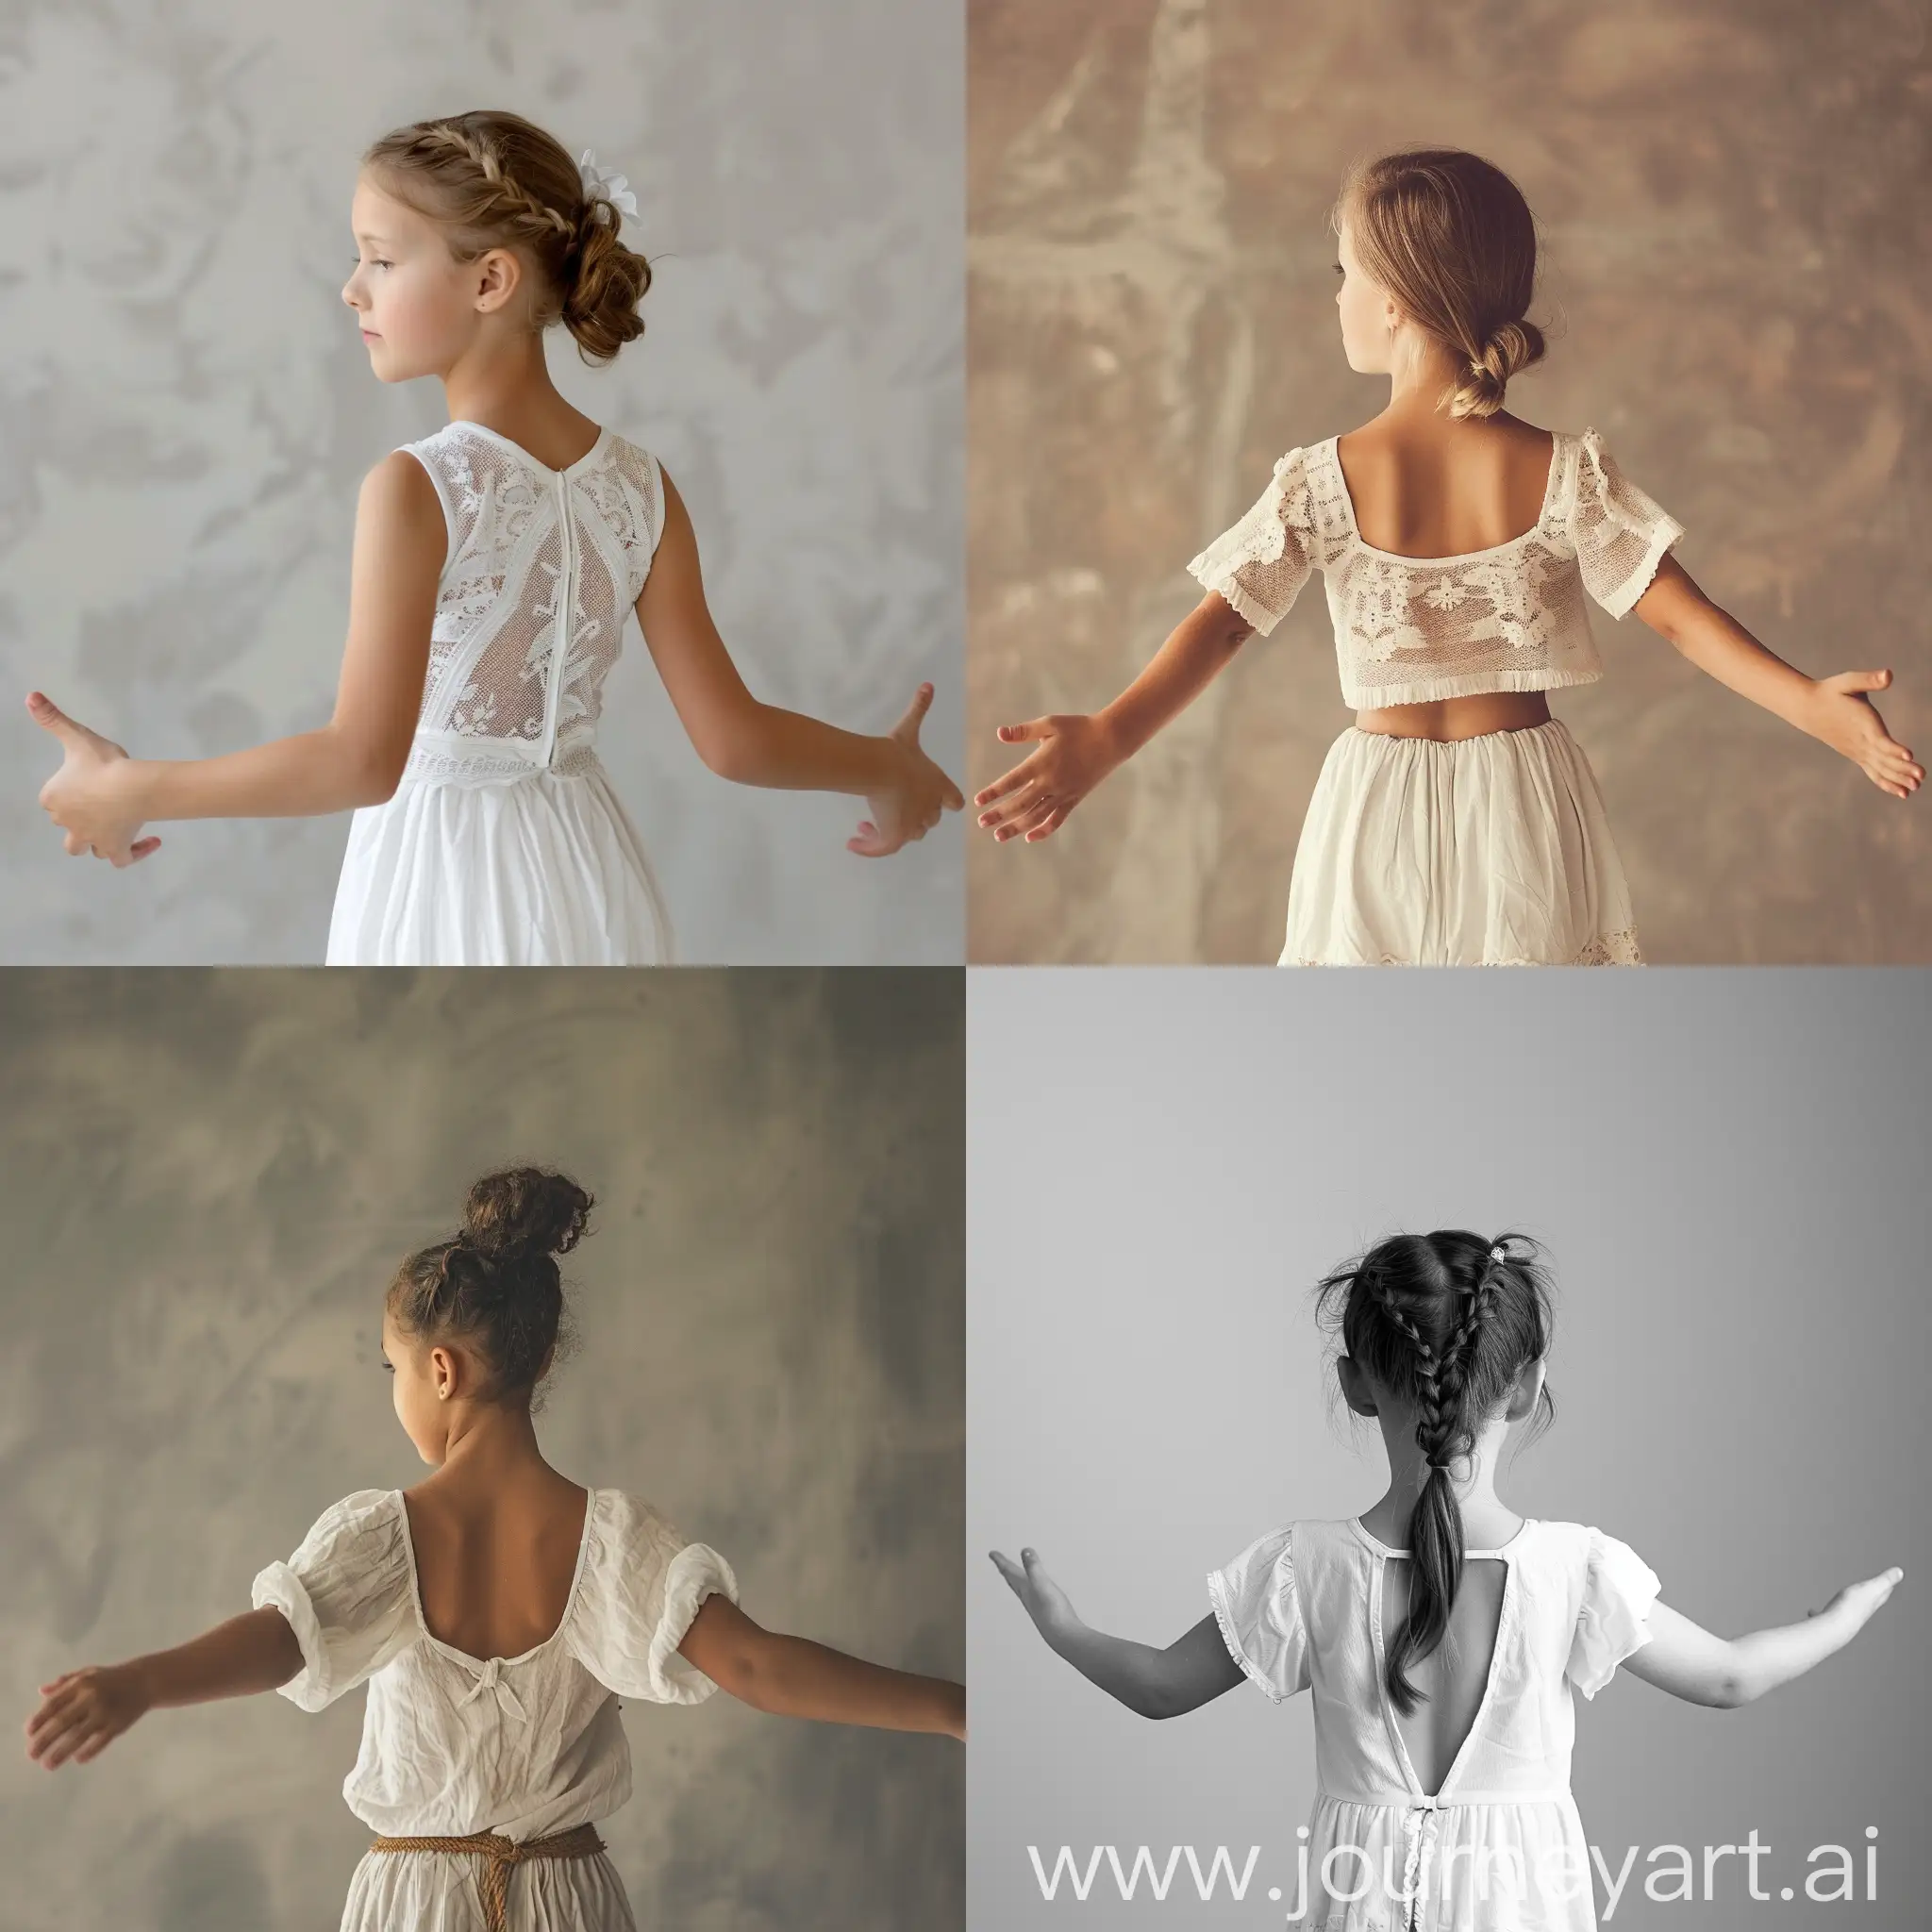 Young-Girl-Model-Embracing-Freedom-with-Arms-Outstretched-in-FullBody-Portrait